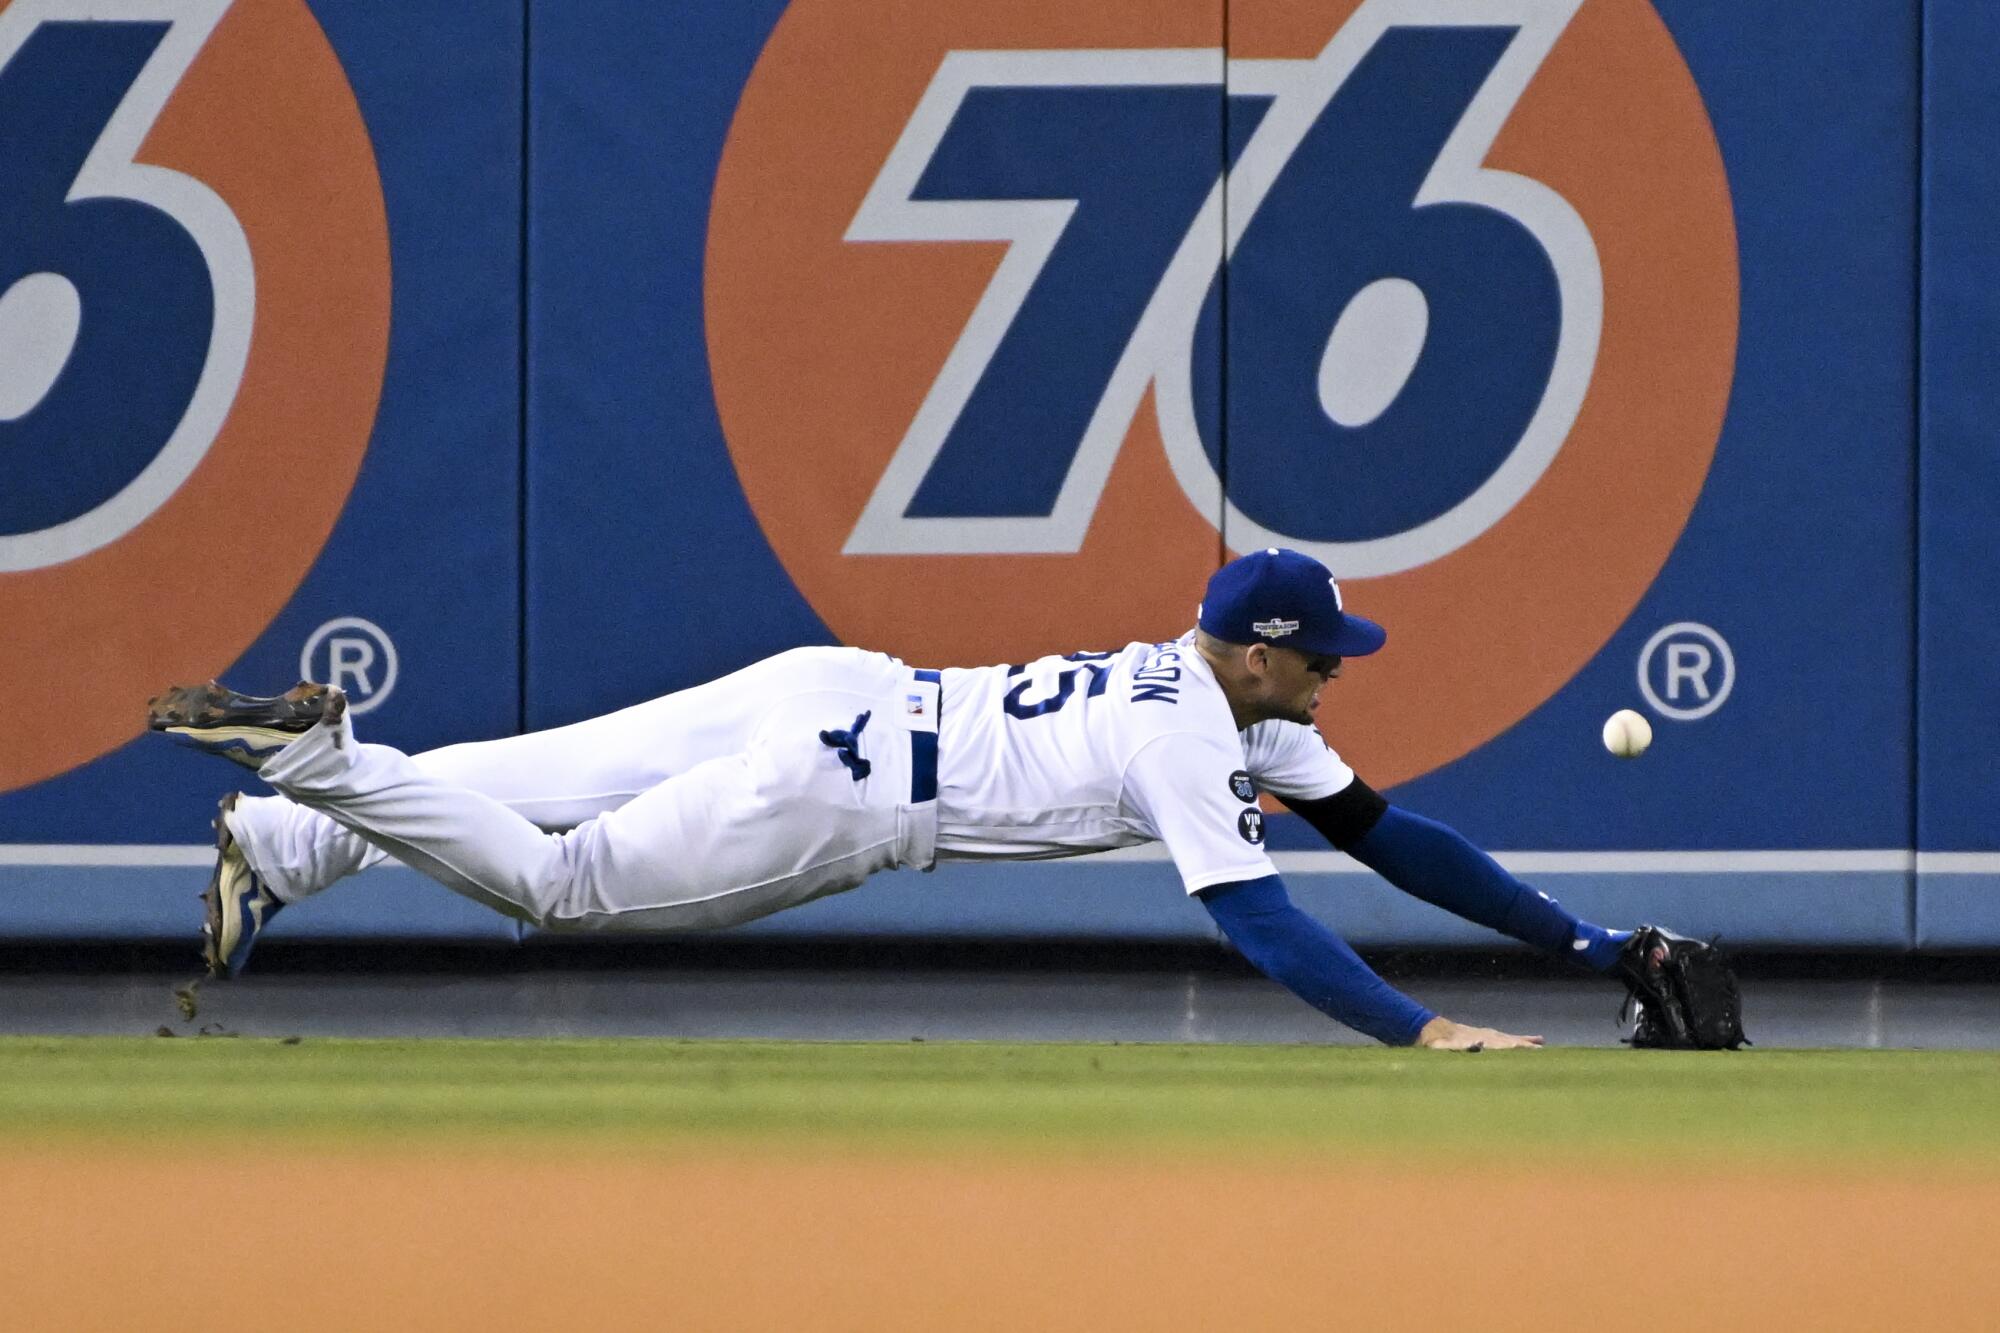 Dodgers left fielder Trayce Thompson dives for a ball.